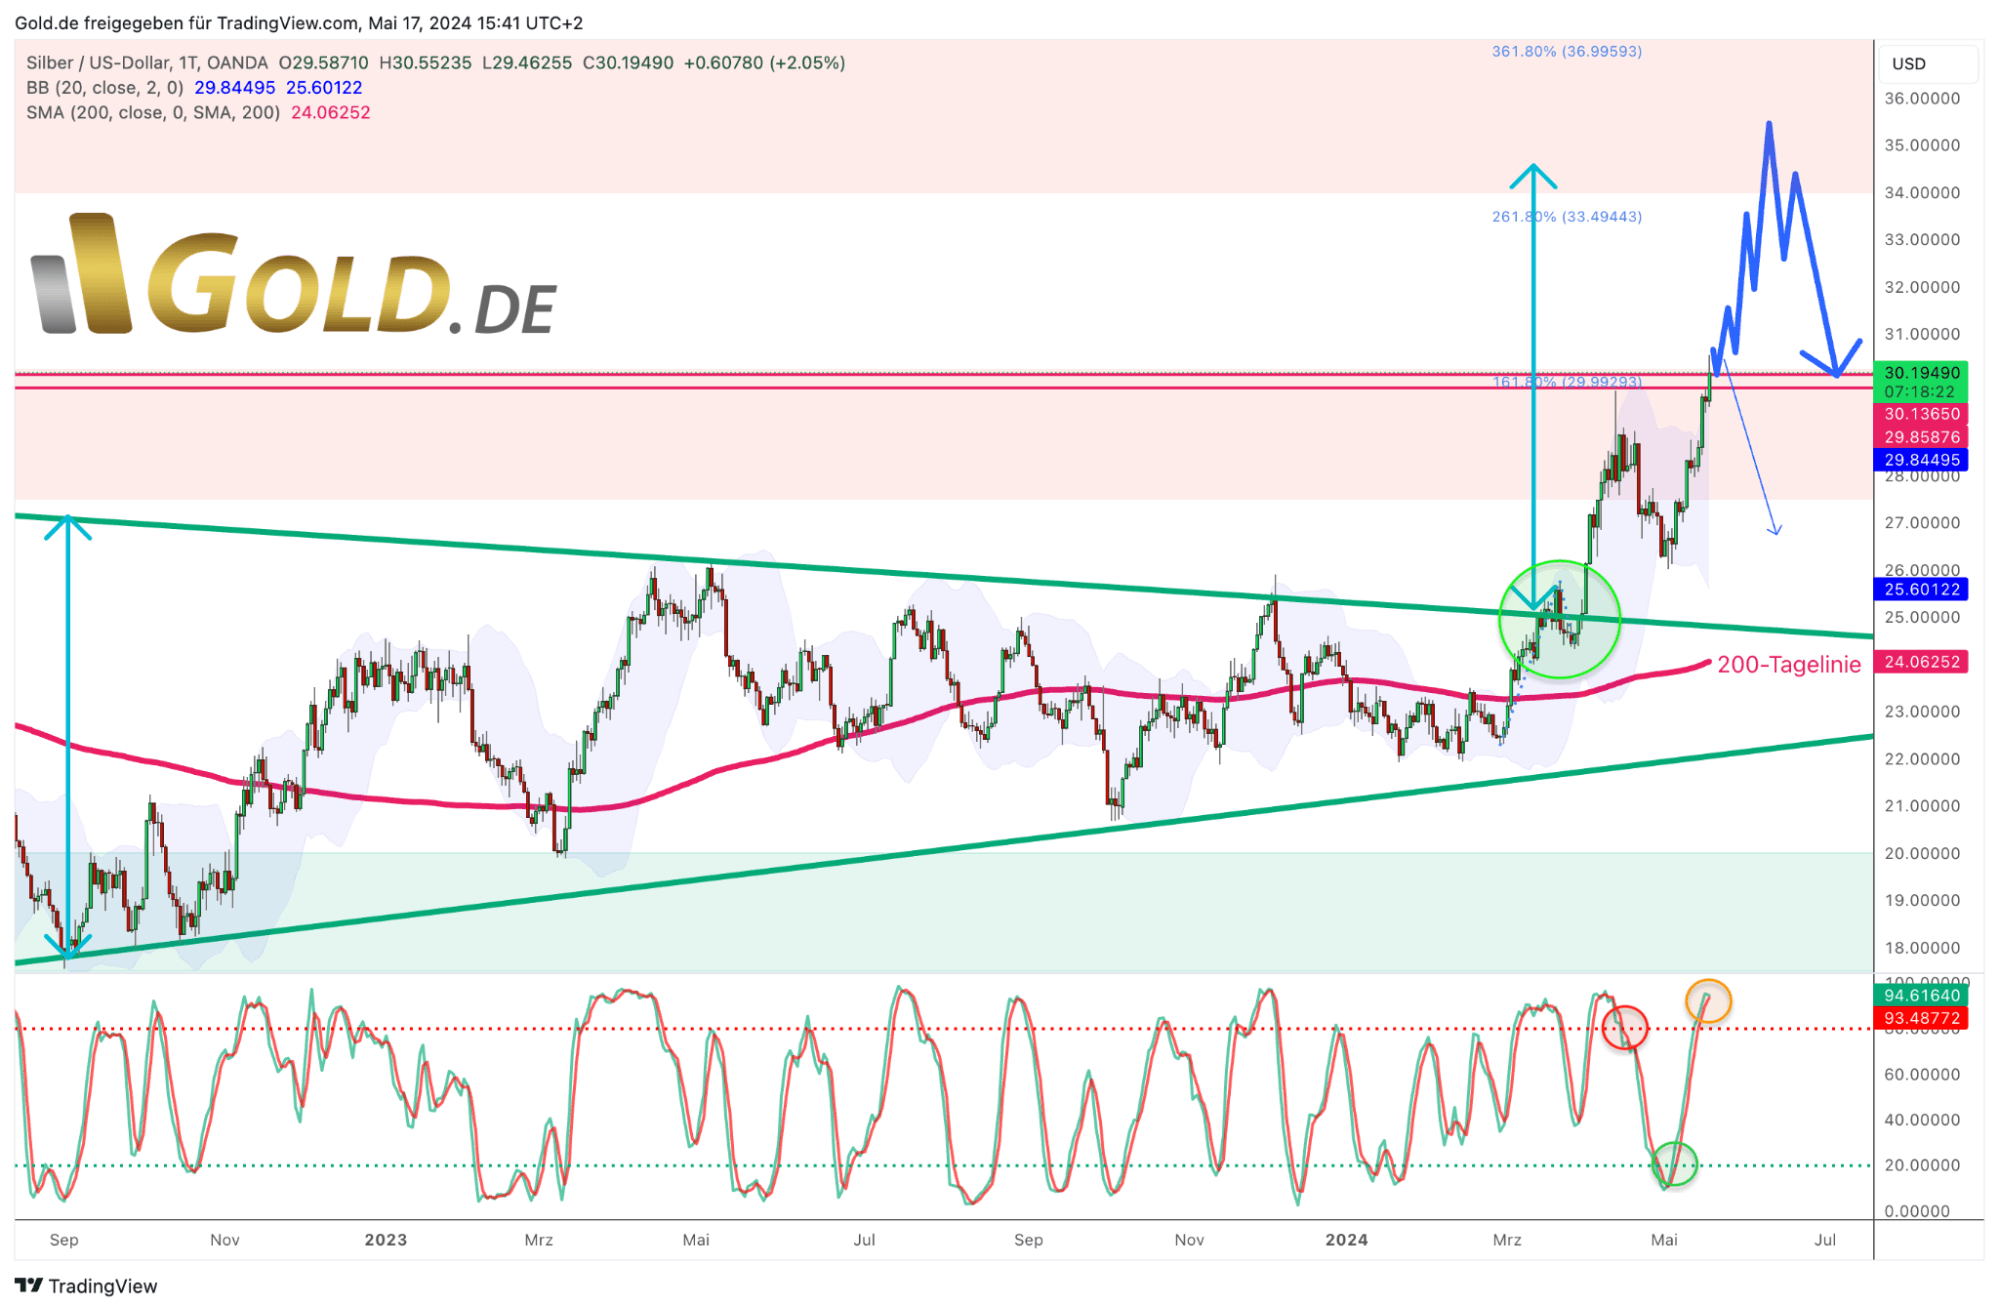 Silber in US-Dollar, Tageschart vom 17. Mai 2024. Quelle: Tradingview